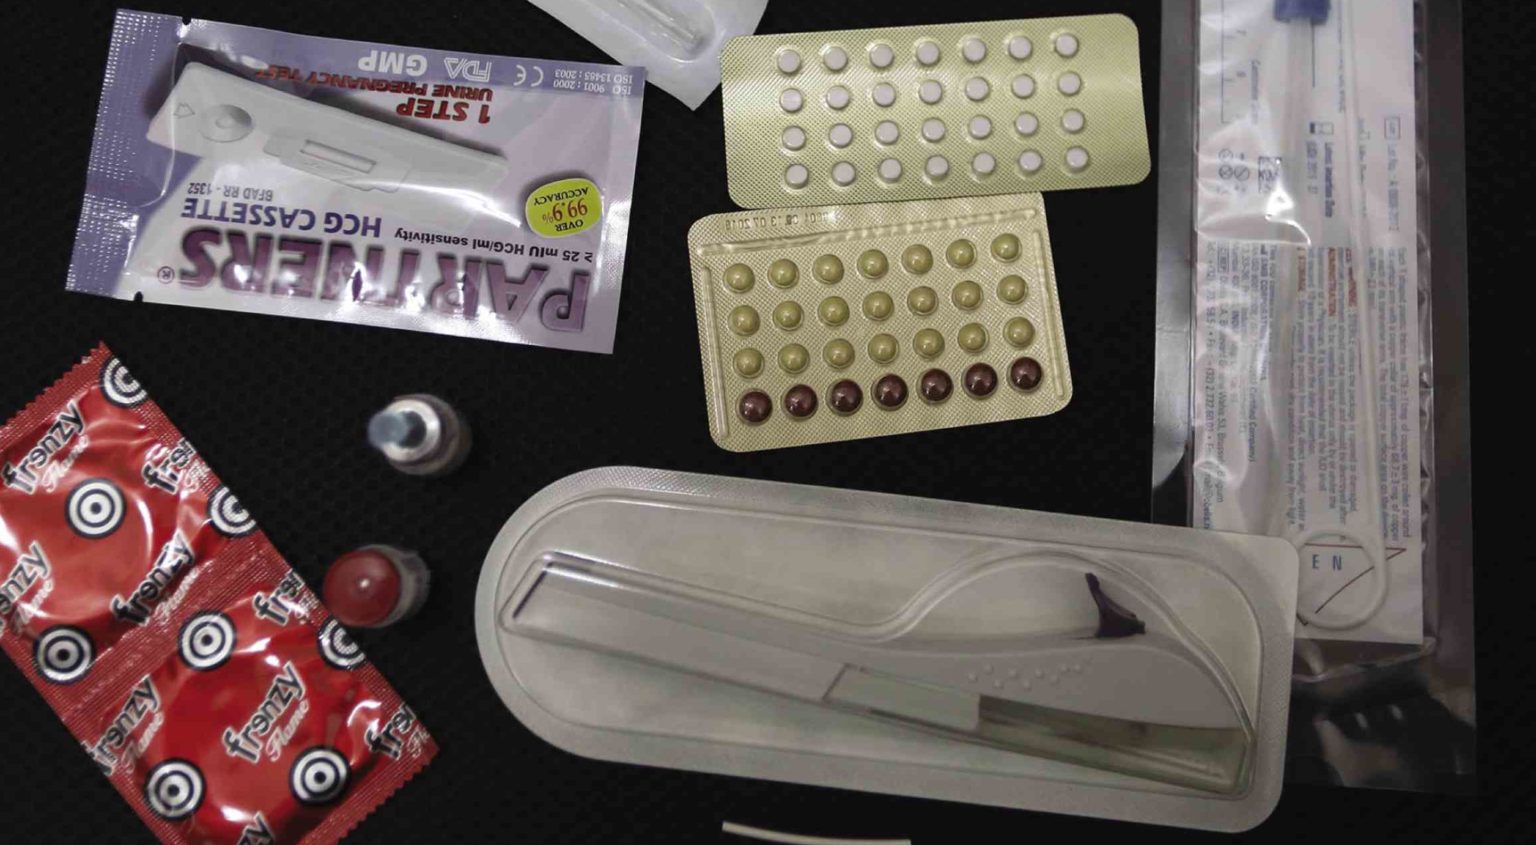 Popcom Hopes More Pantries Will Hand Out Contraceptives To Avoid Unplanned Pregnancies